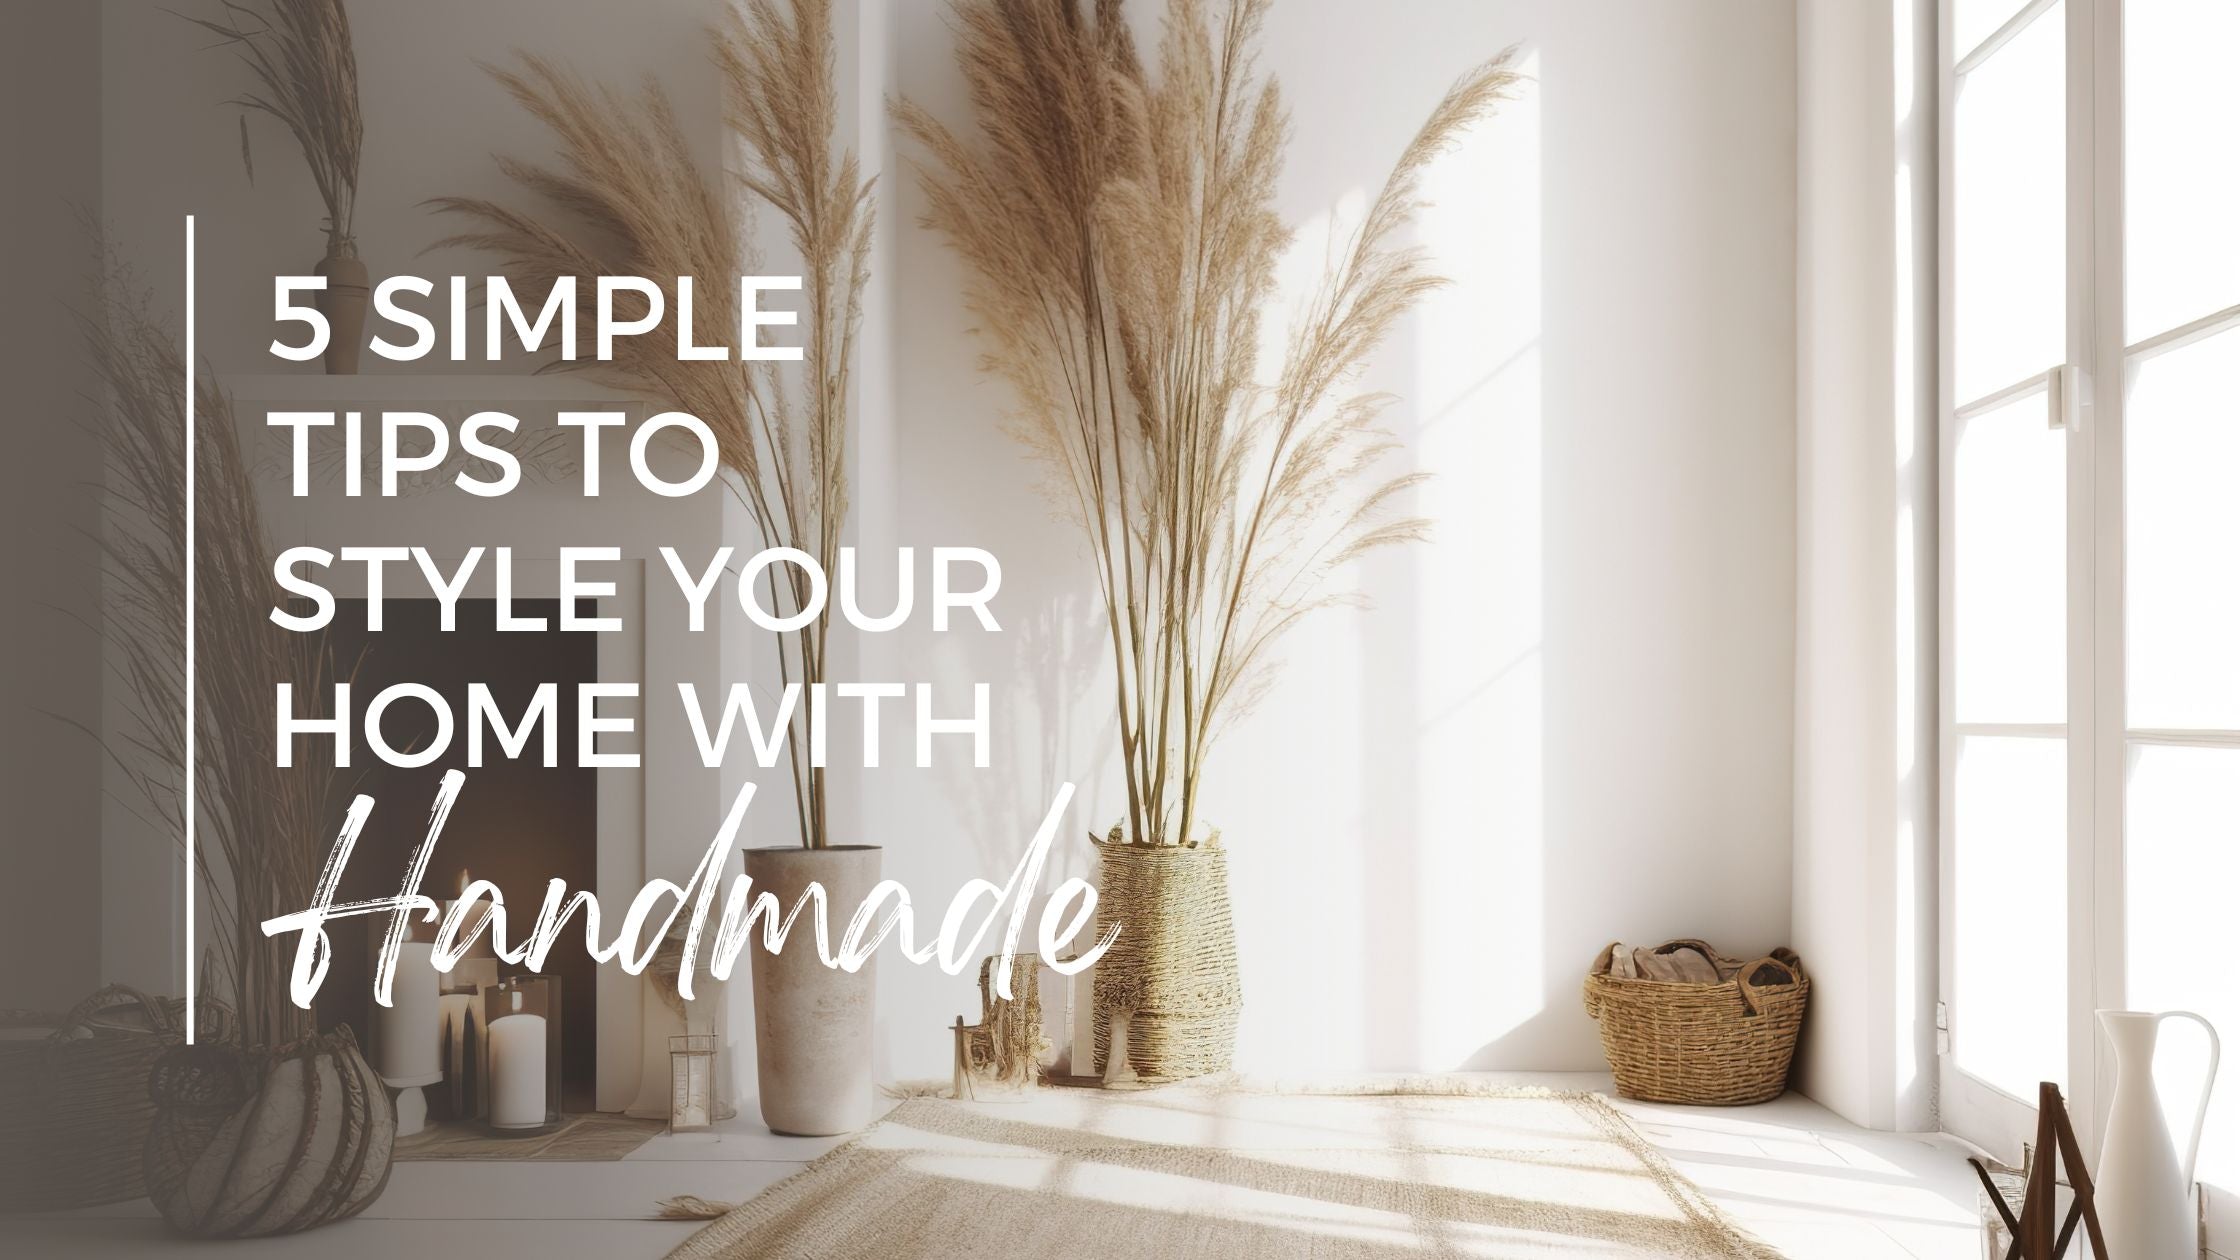 5 simple tips to style your home